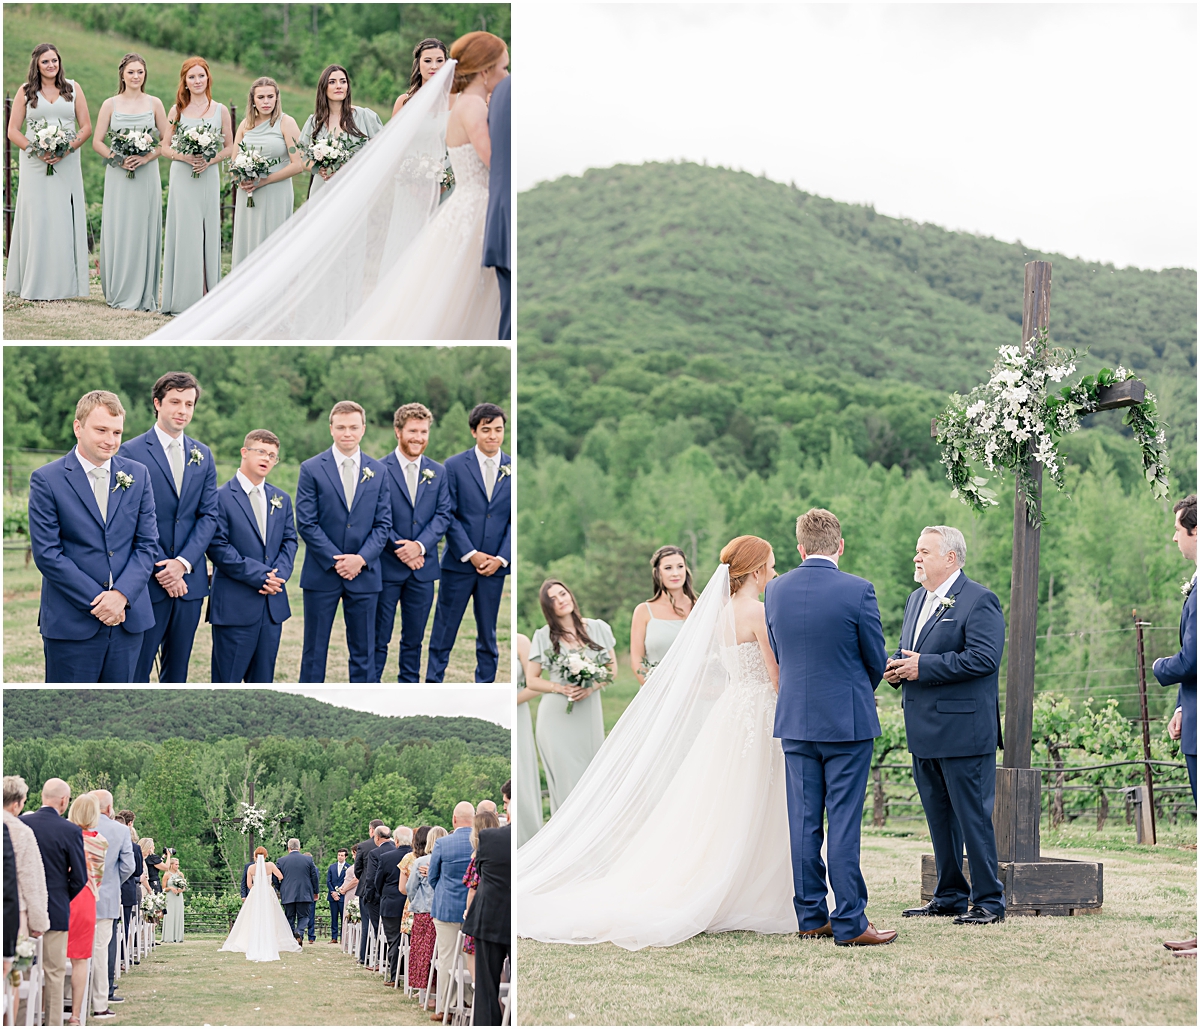 Collage of bride and groom getting married